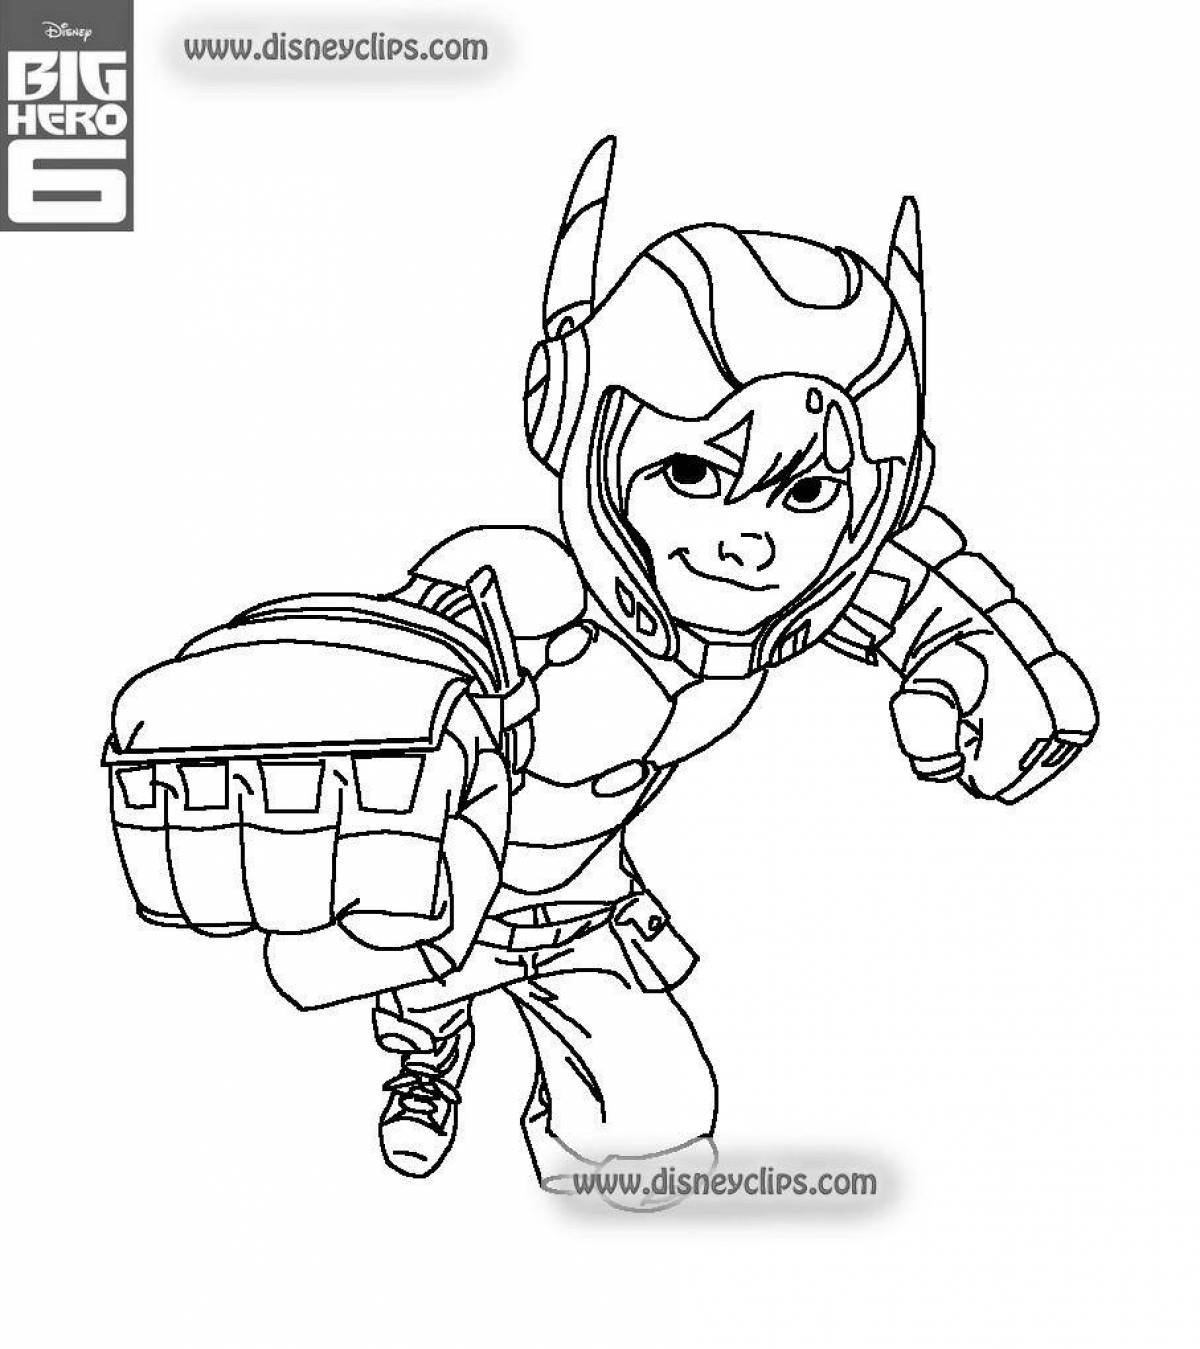 Kira's animated coloring page